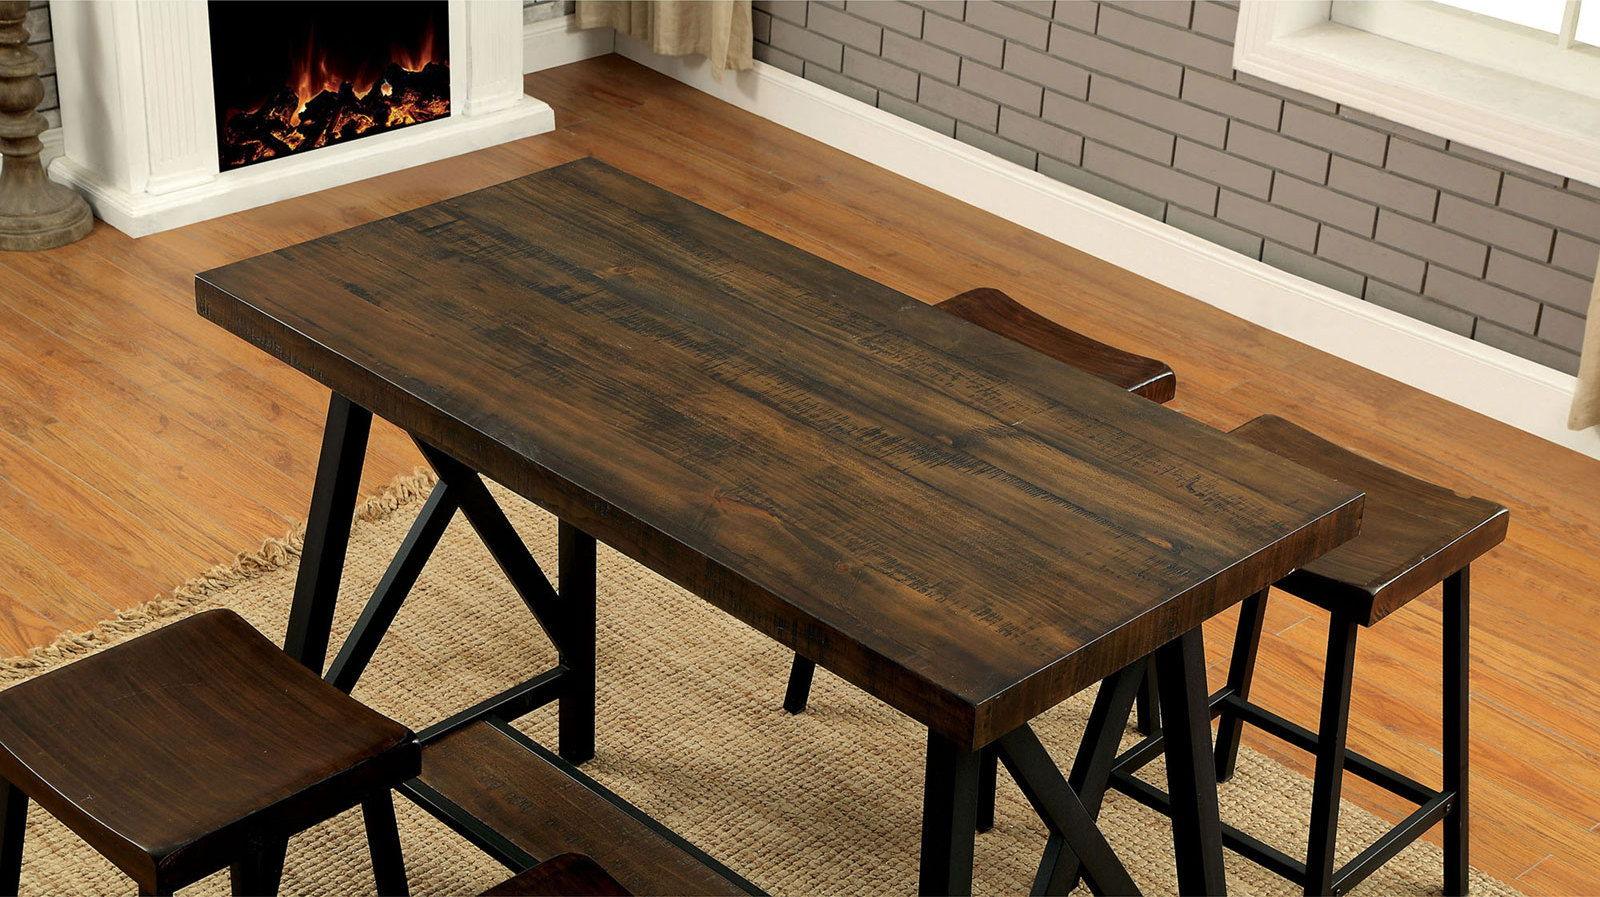 Furniture of America - Lainey - Counter Height Table - Medium Weathered Oak / Black - 5th Avenue Furniture